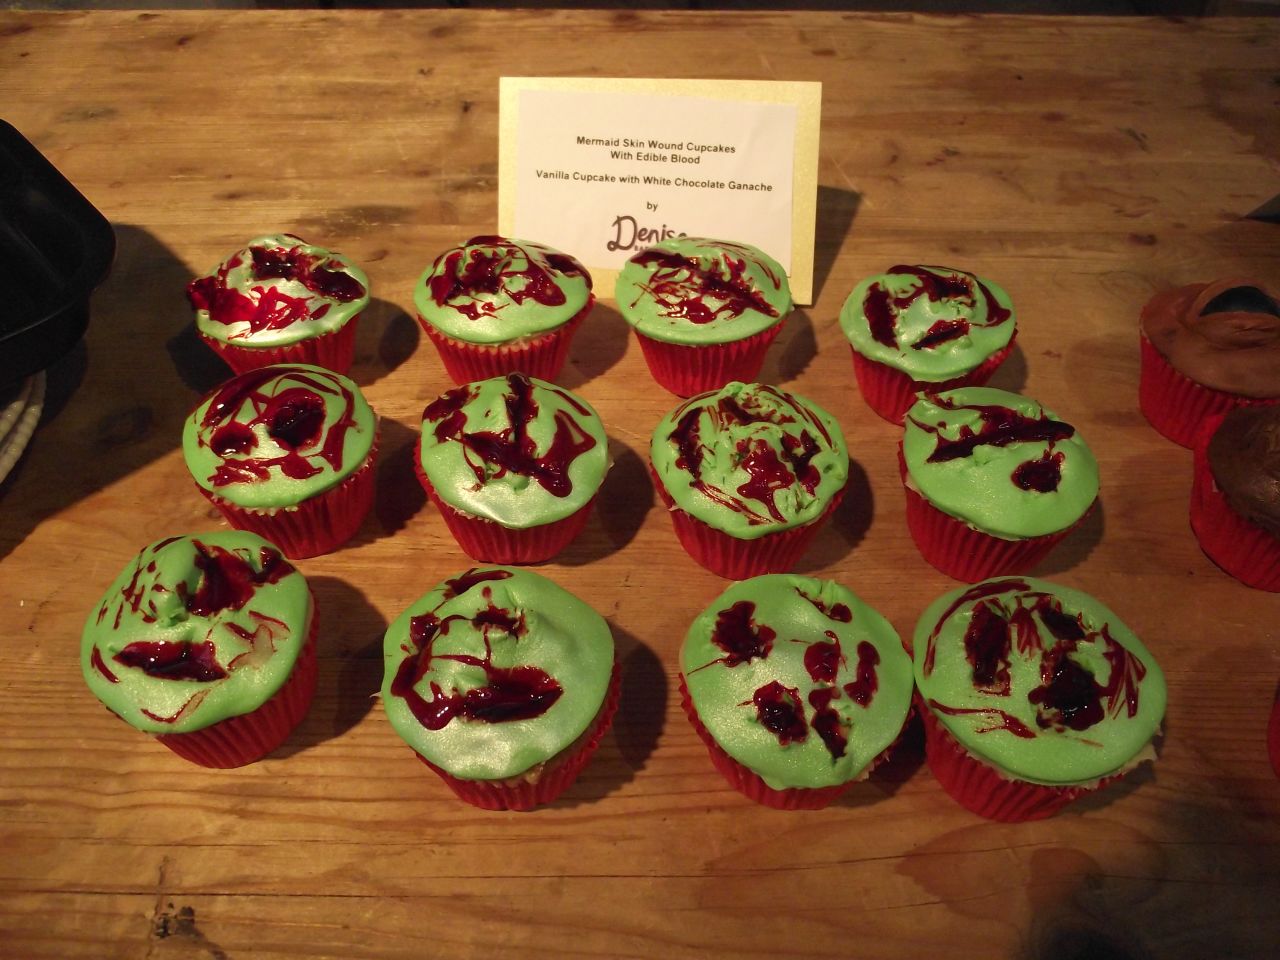 Wounded mermaid skin, with delicious edible blood, from <a href="http://www.denisebakescakes.co.uk/" target="_blank" target="_blank">Denise Bakes Cakes.</a>